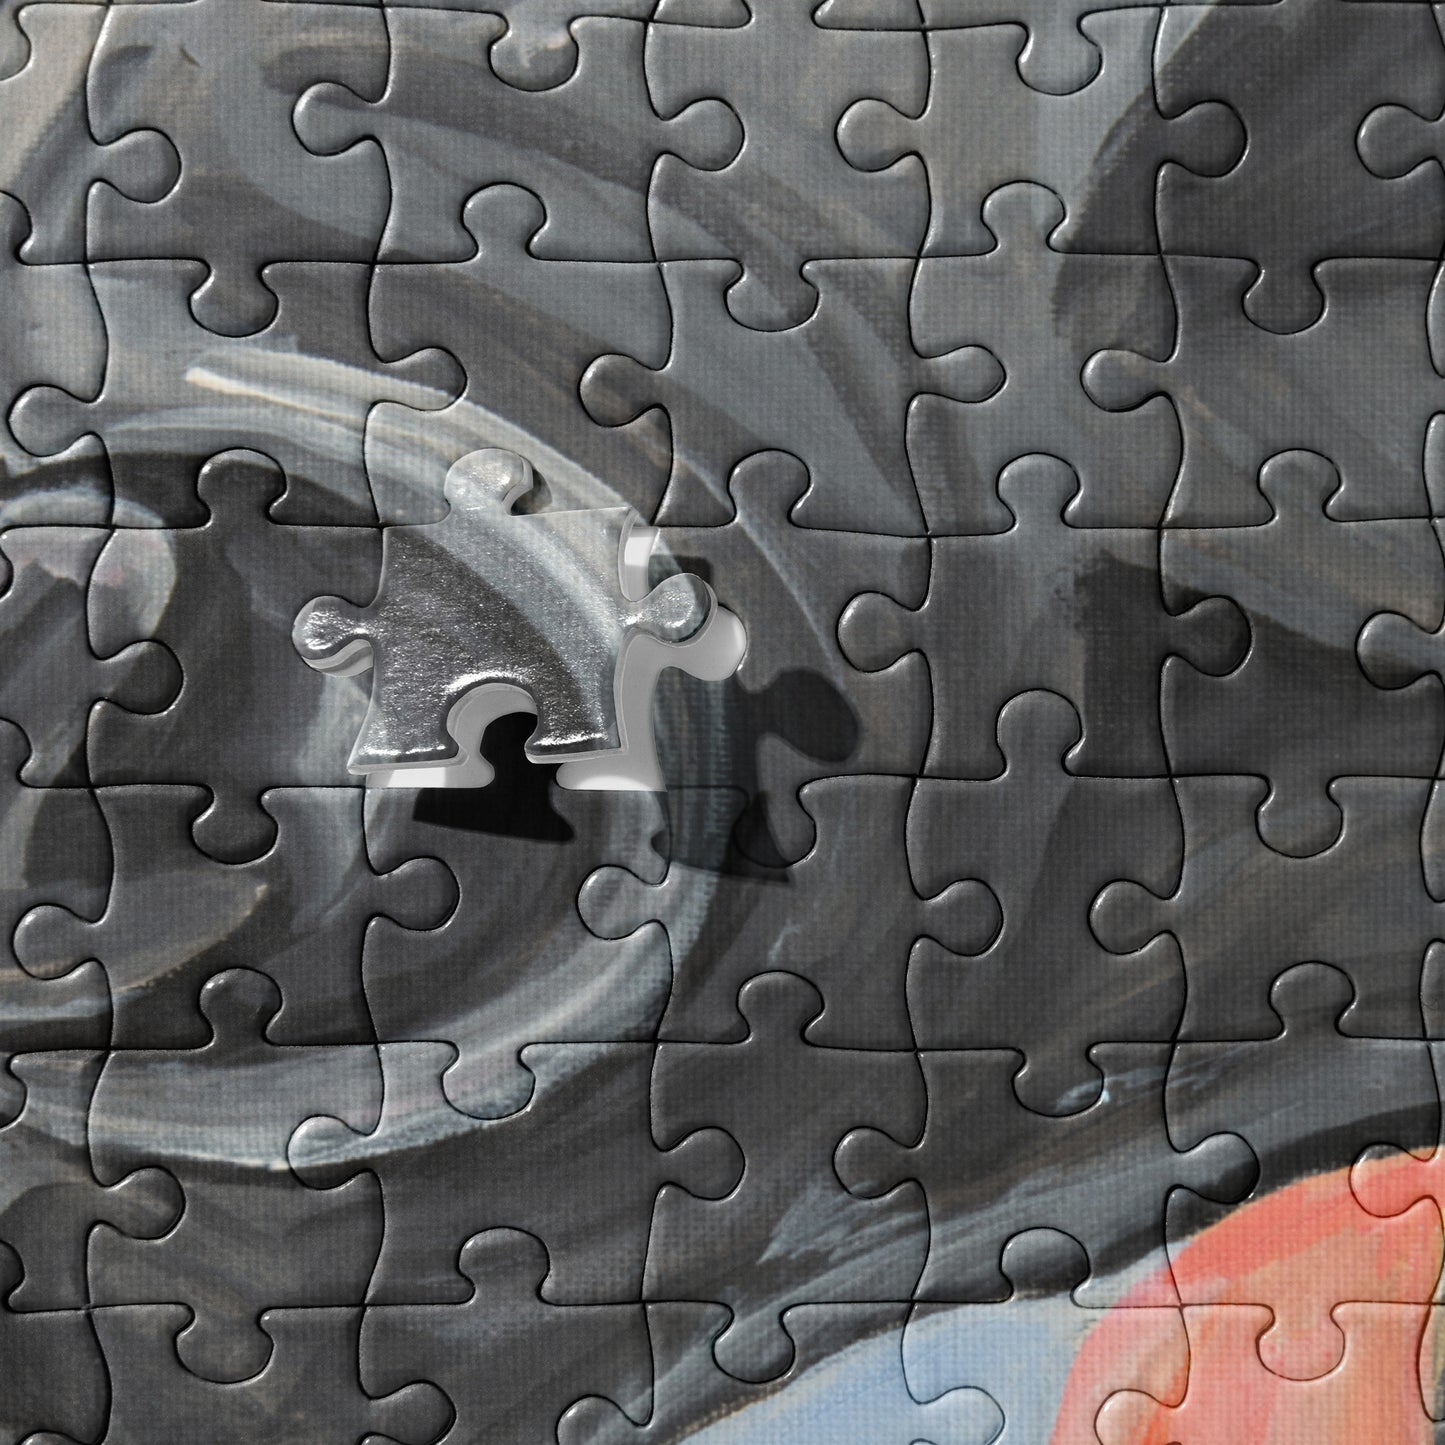 The Apple Jigsaw puzzle